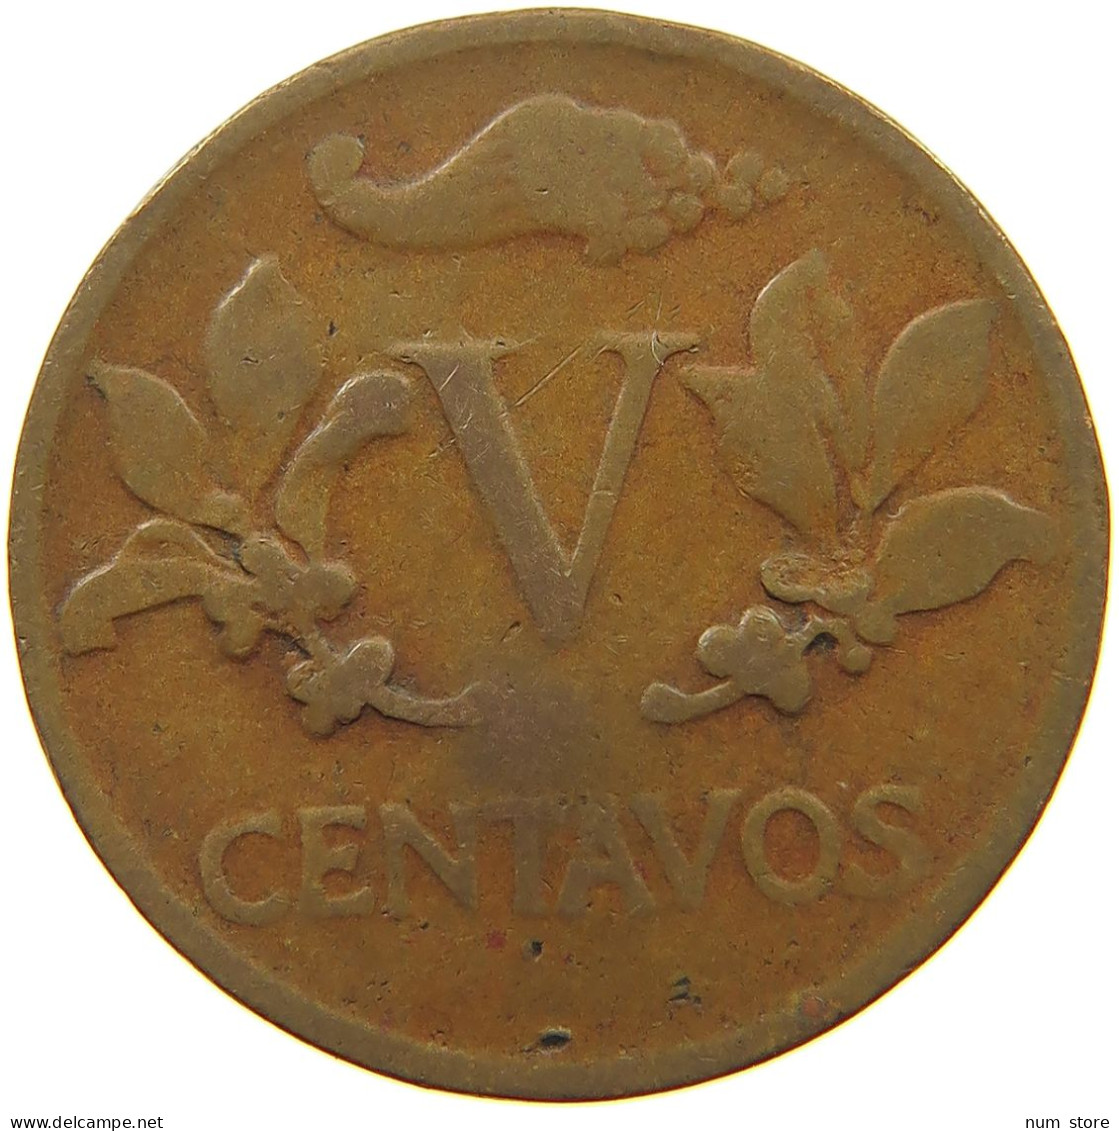 COLOMBIA 5 CENTAVOS 1944 #s055 0141 - Colombia